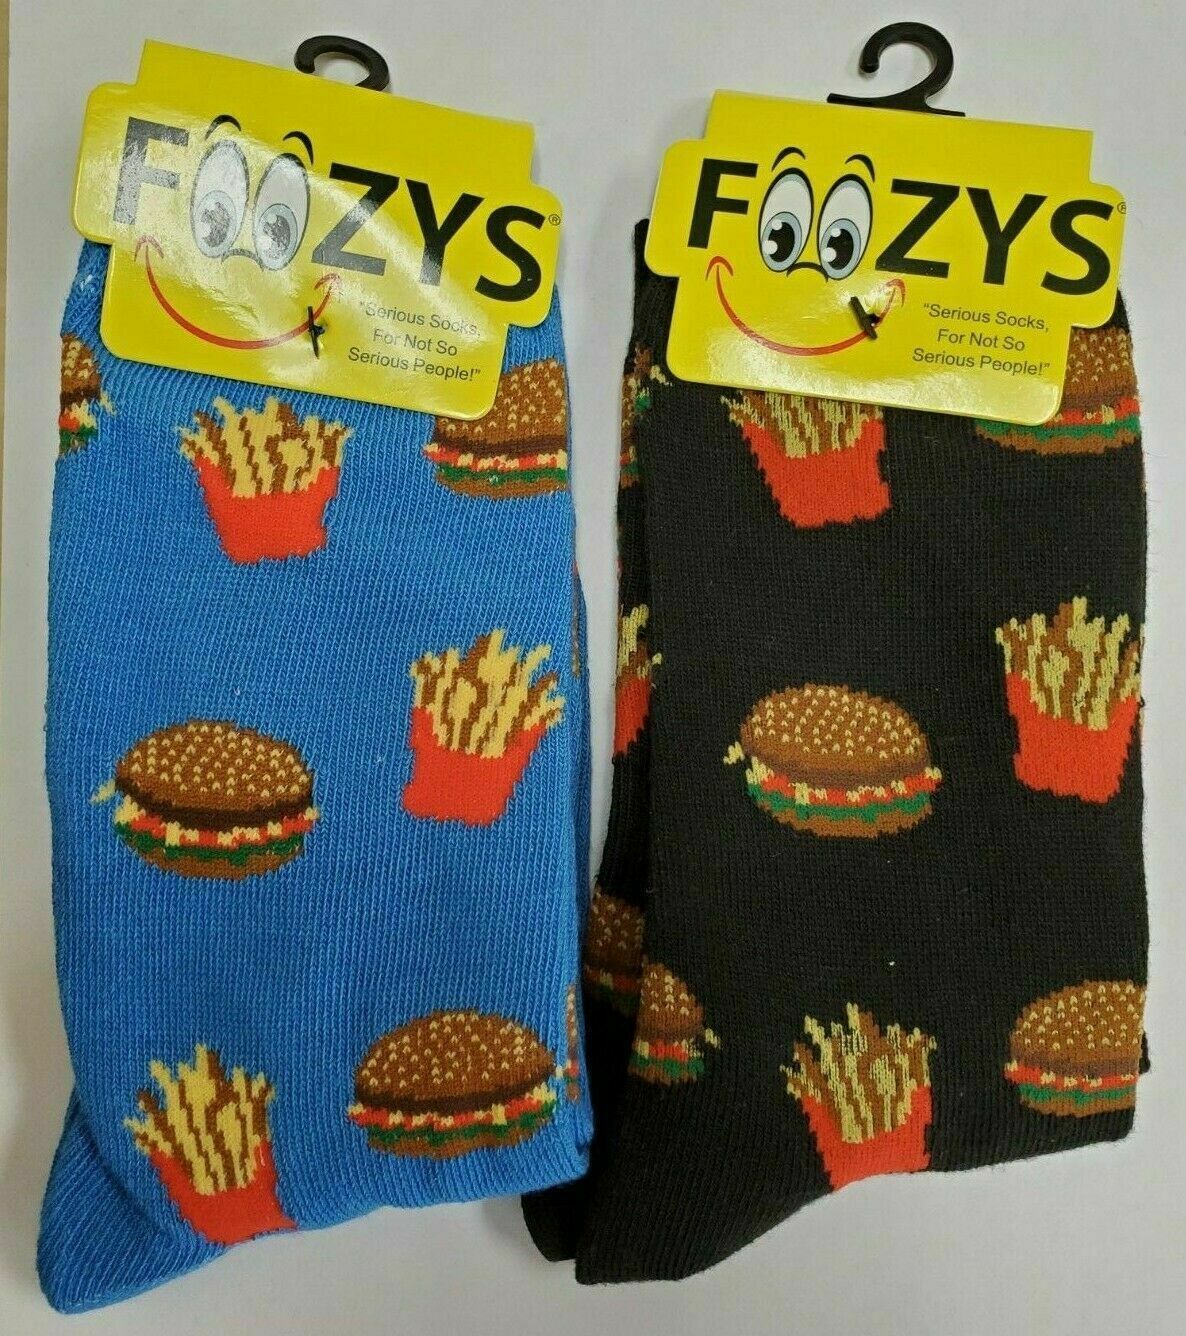 Cheese Burger Potato French Fries Fast Food Sandwich Socks 2 Pairs Men's Foozys